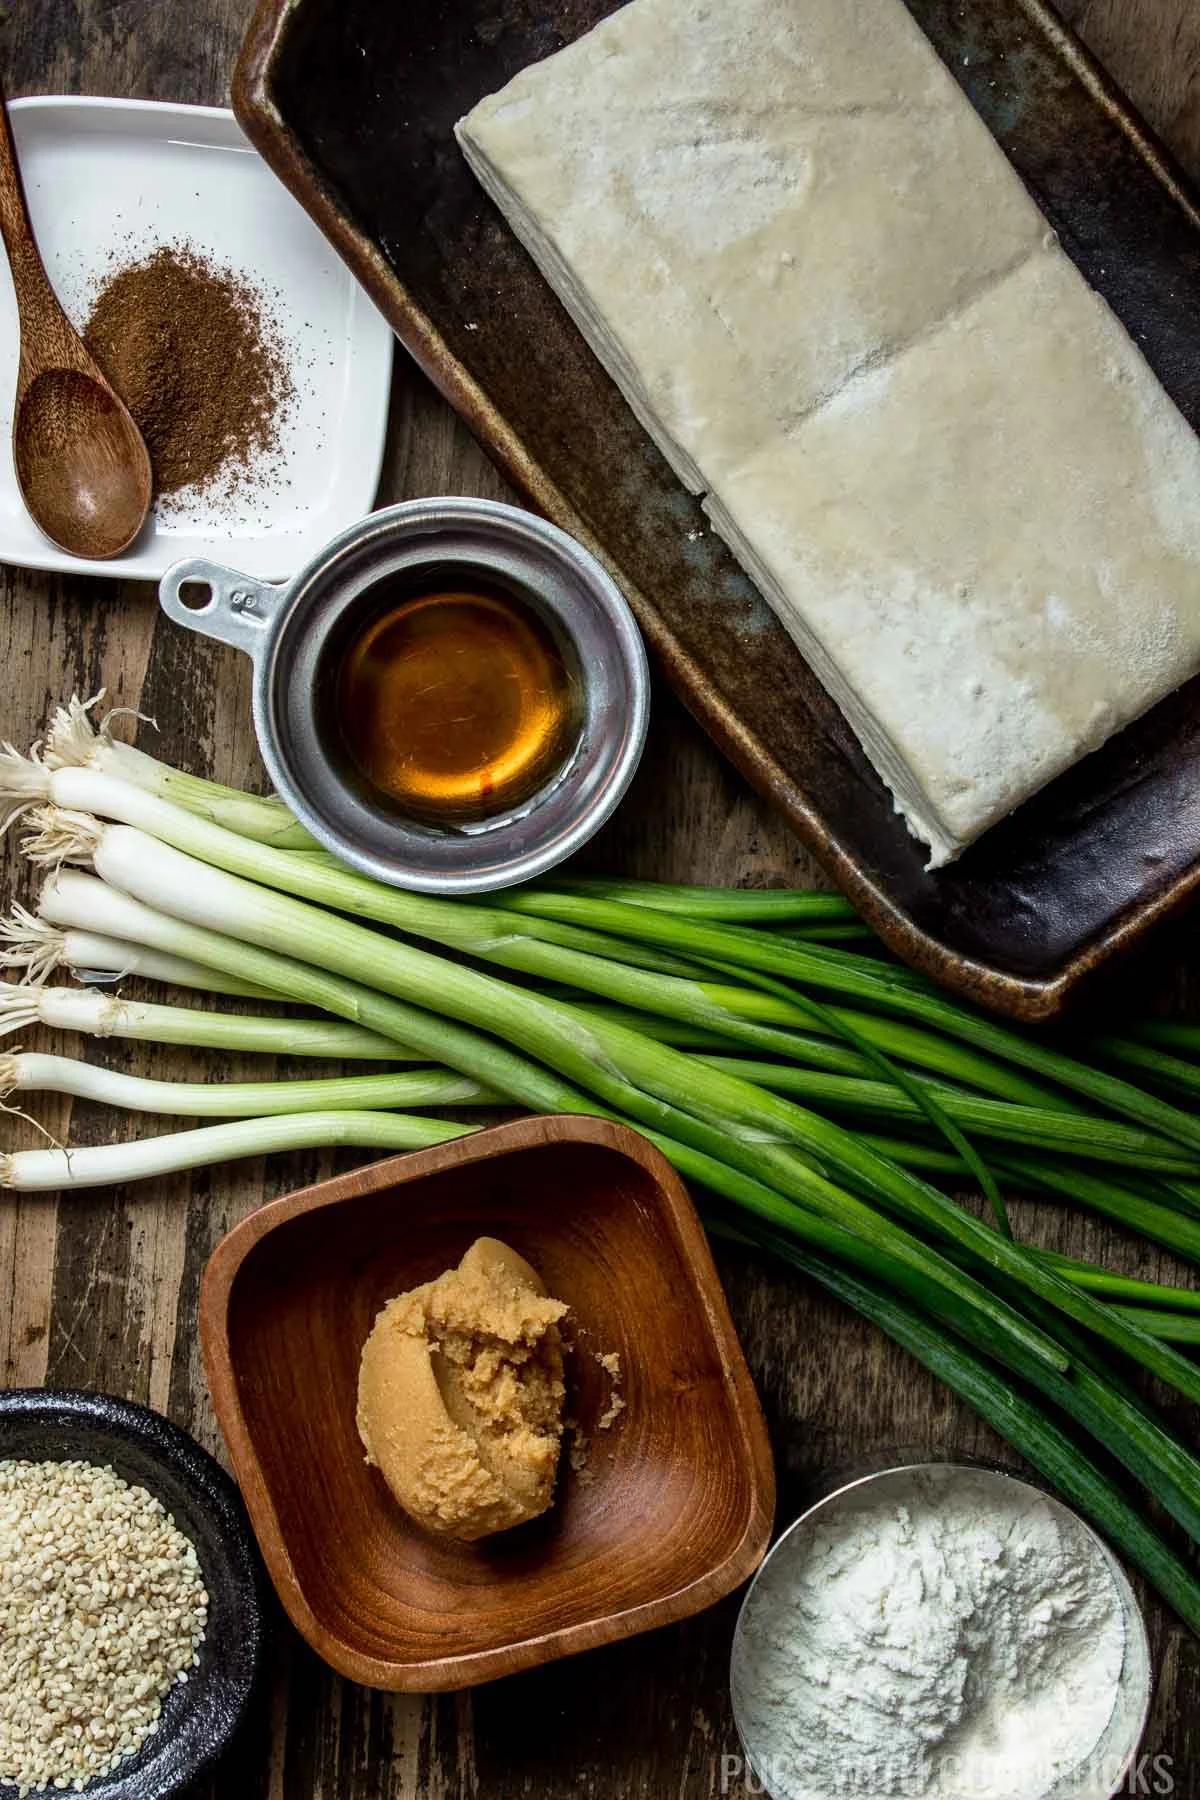 Chinese Scallion Pancake Ingredients (puff pastry, miso, green onions, sesame seeds, sesame oil)